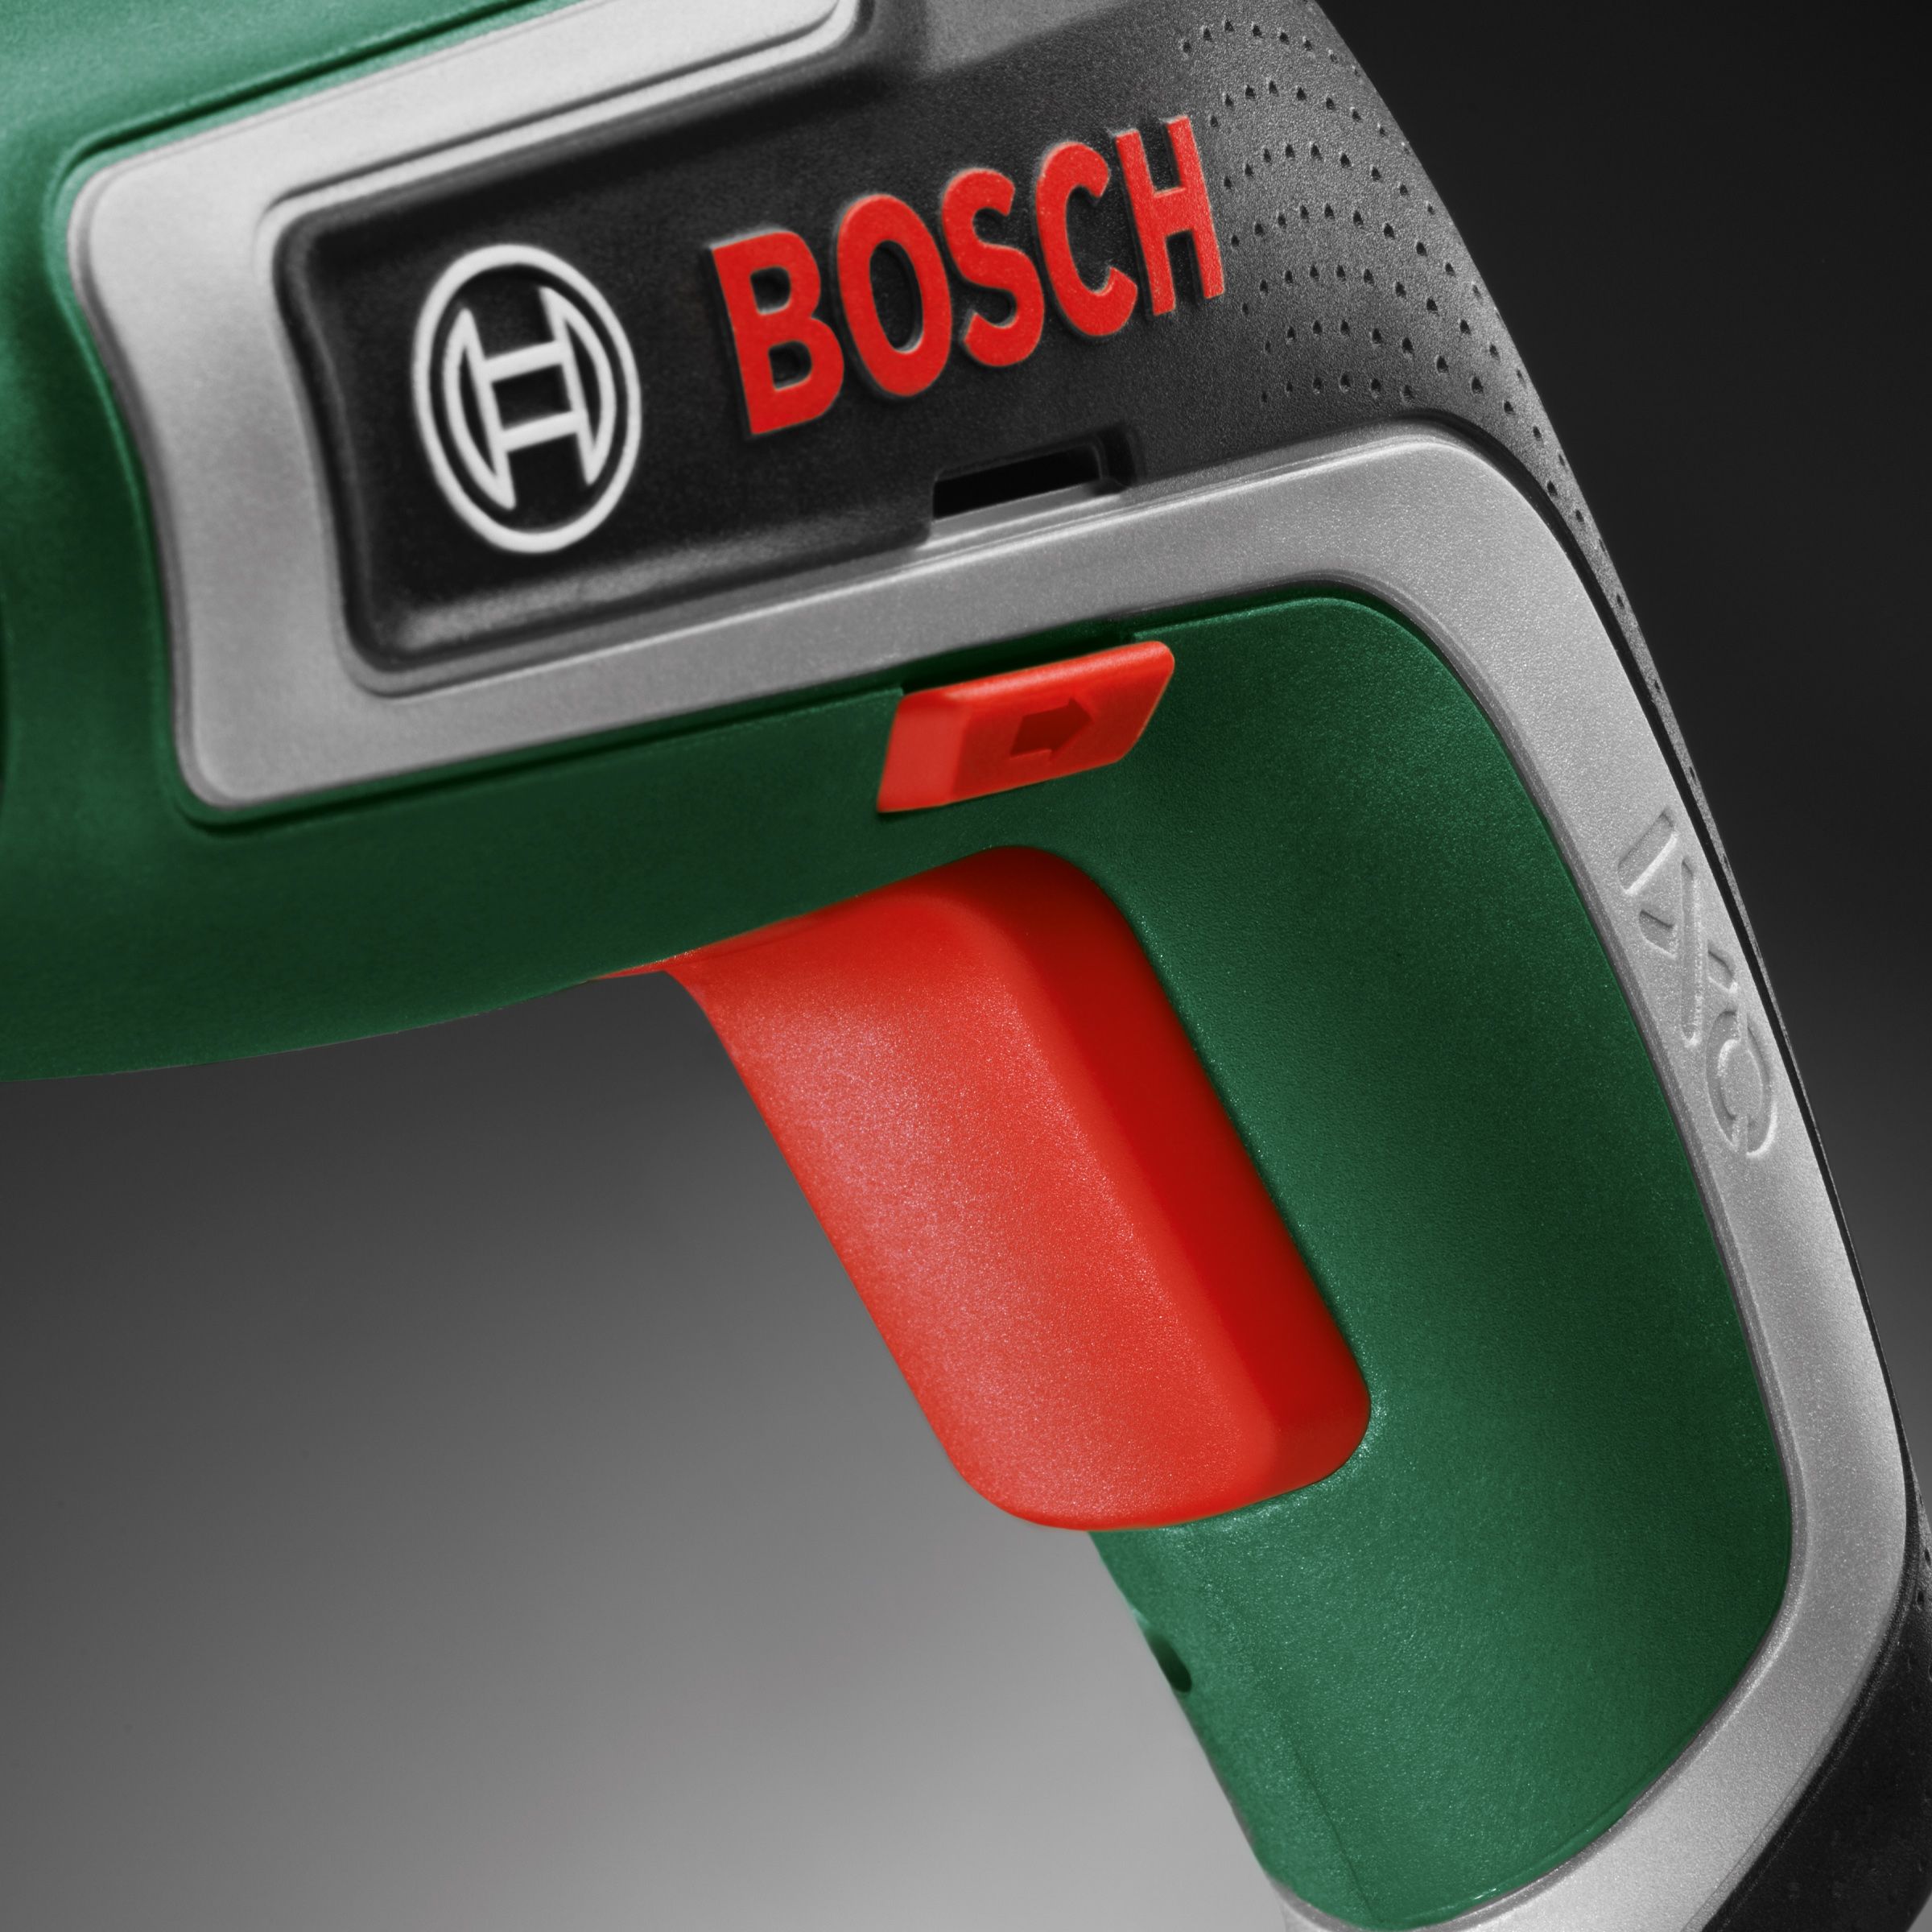 IXO 7 from Bosch in the test: The cordless screwdriver for gadget